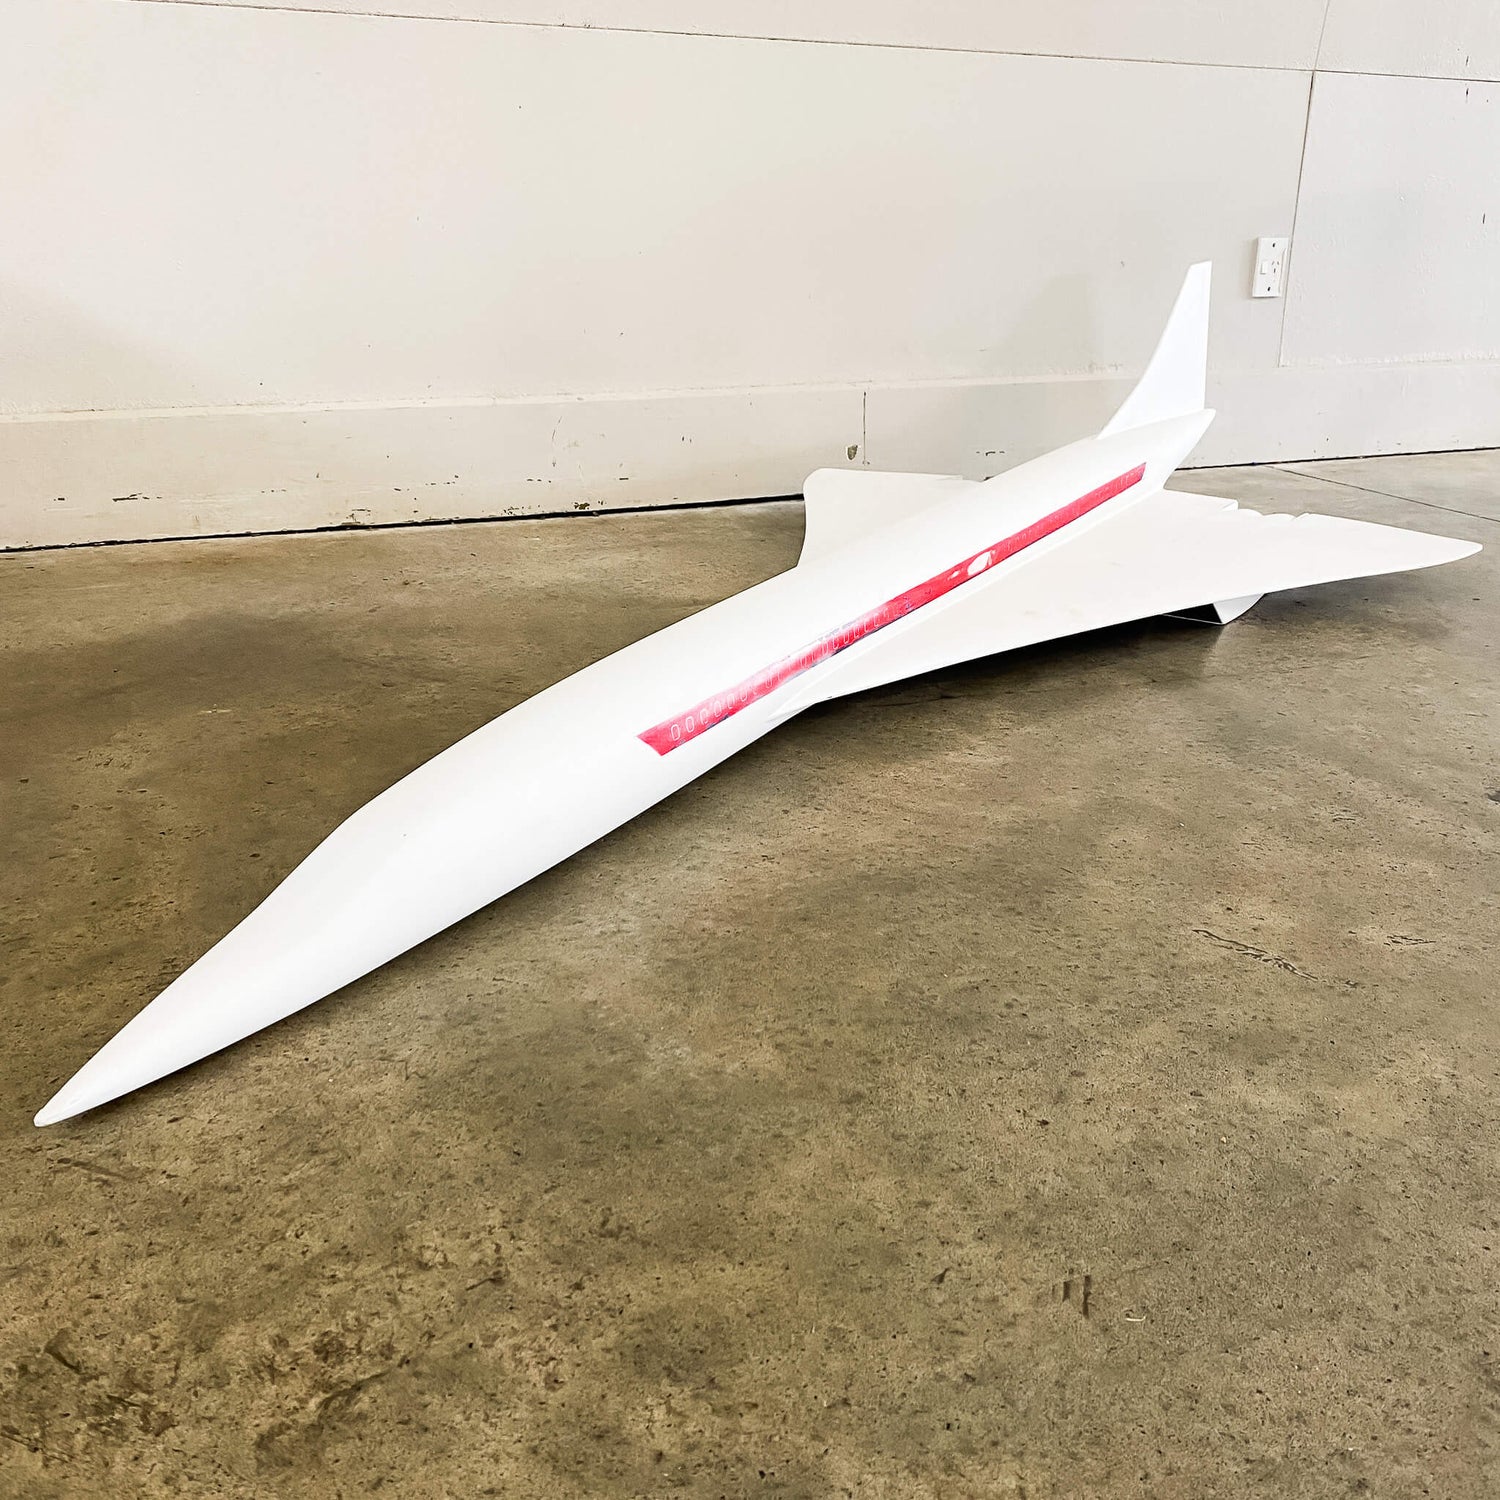 A Large Model Concorde